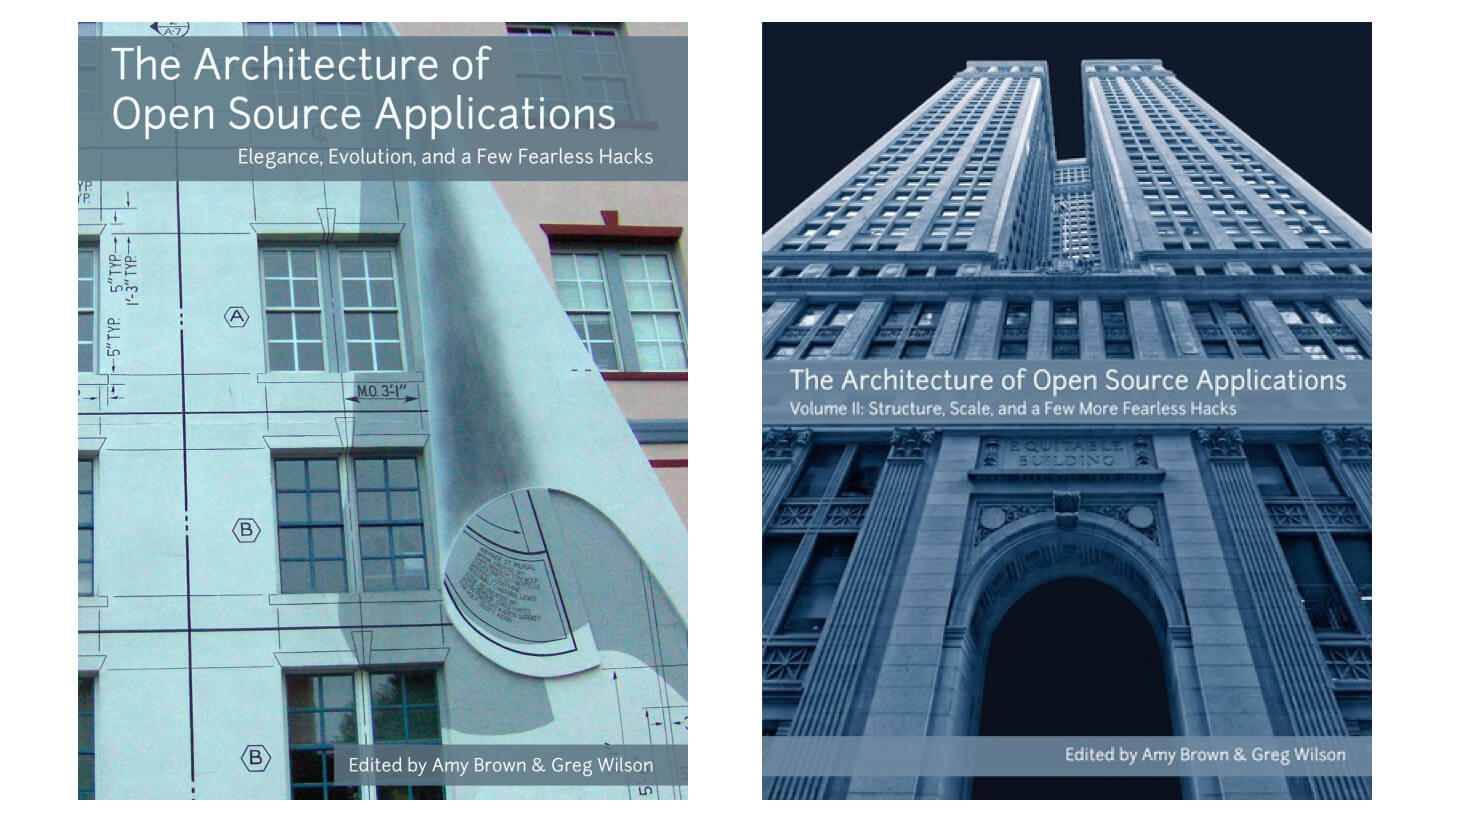 The Architecture of Open Source Applications (white background)